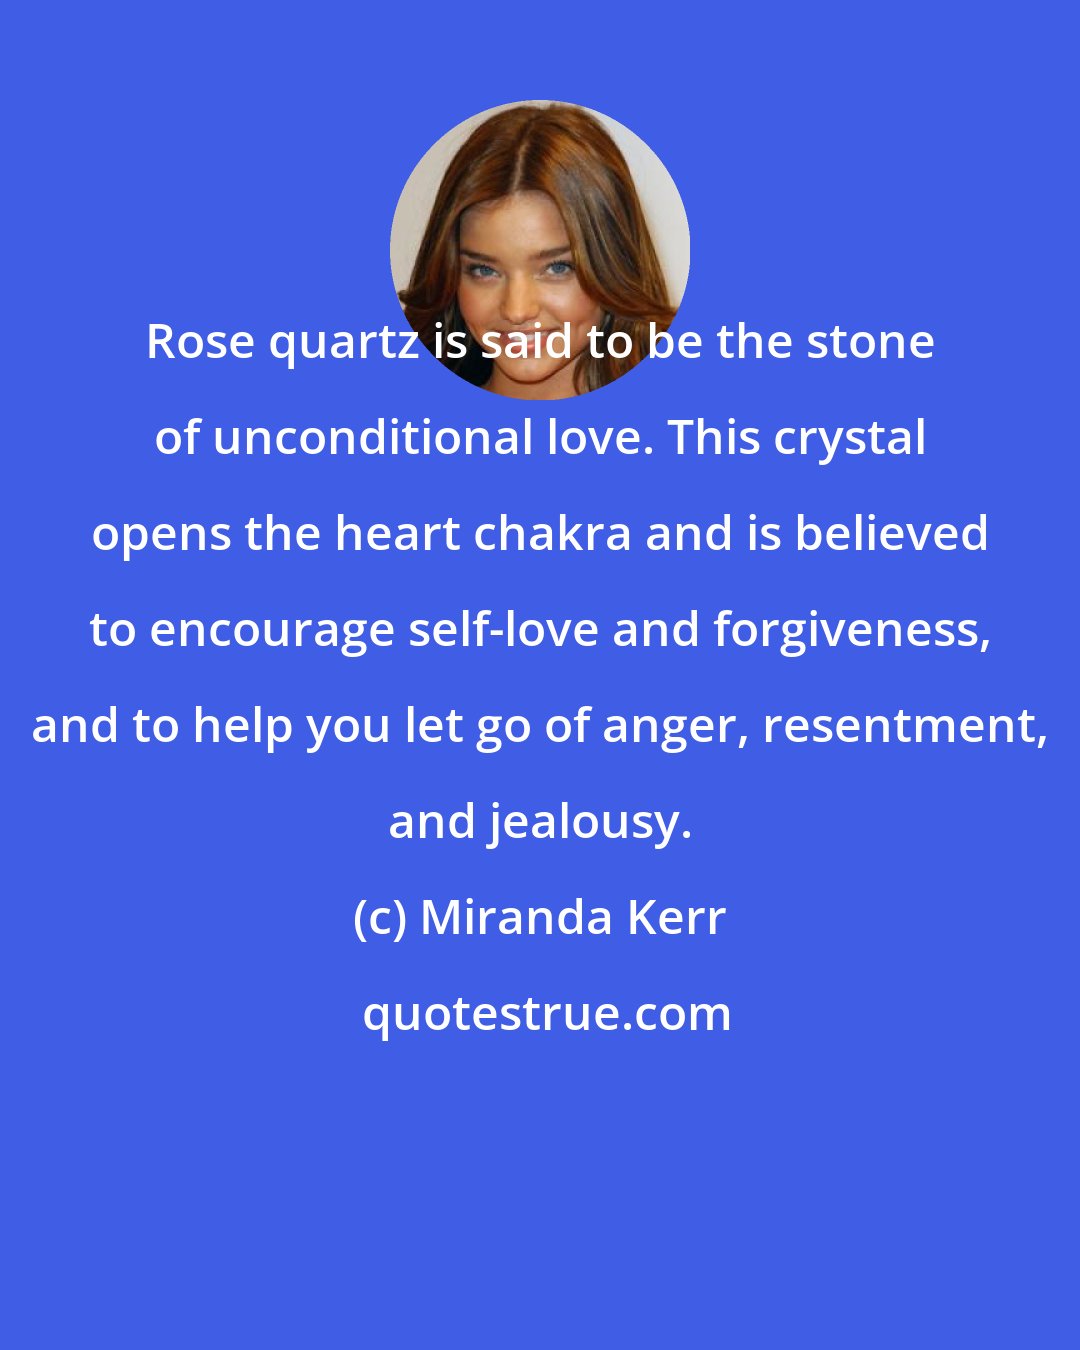 Miranda Kerr: Rose quartz is said to be the stone of unconditional love. This crystal opens the heart chakra and is believed to encourage self-love and forgiveness, and to help you let go of anger, resentment, and jealousy.